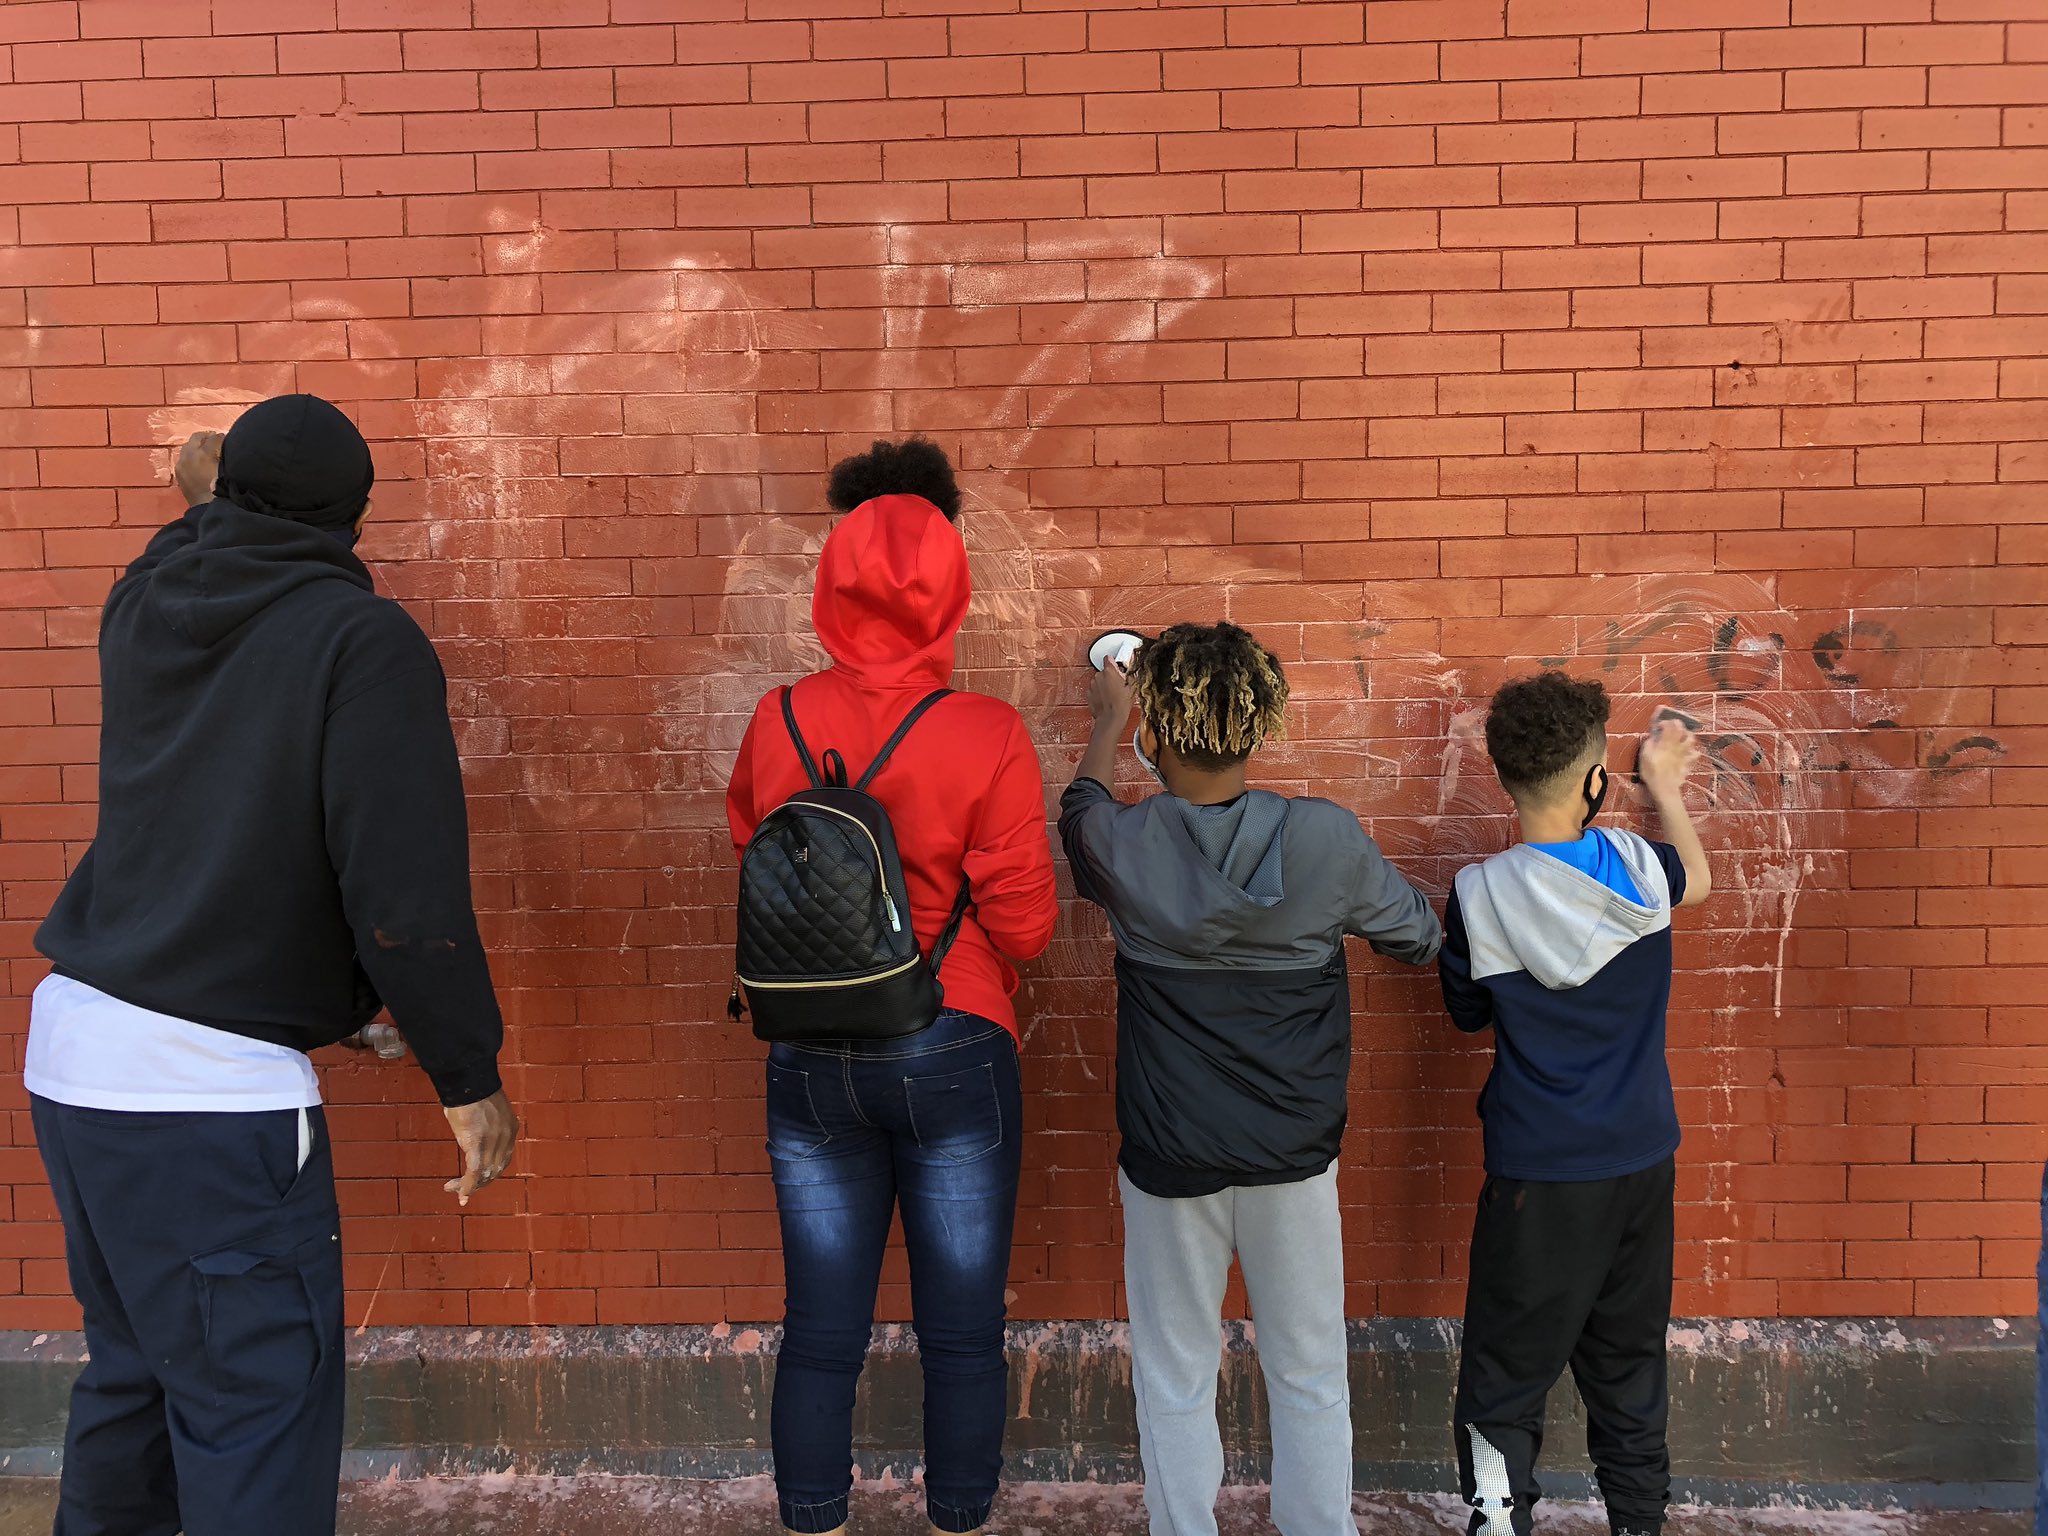 family works to clean up graffiti